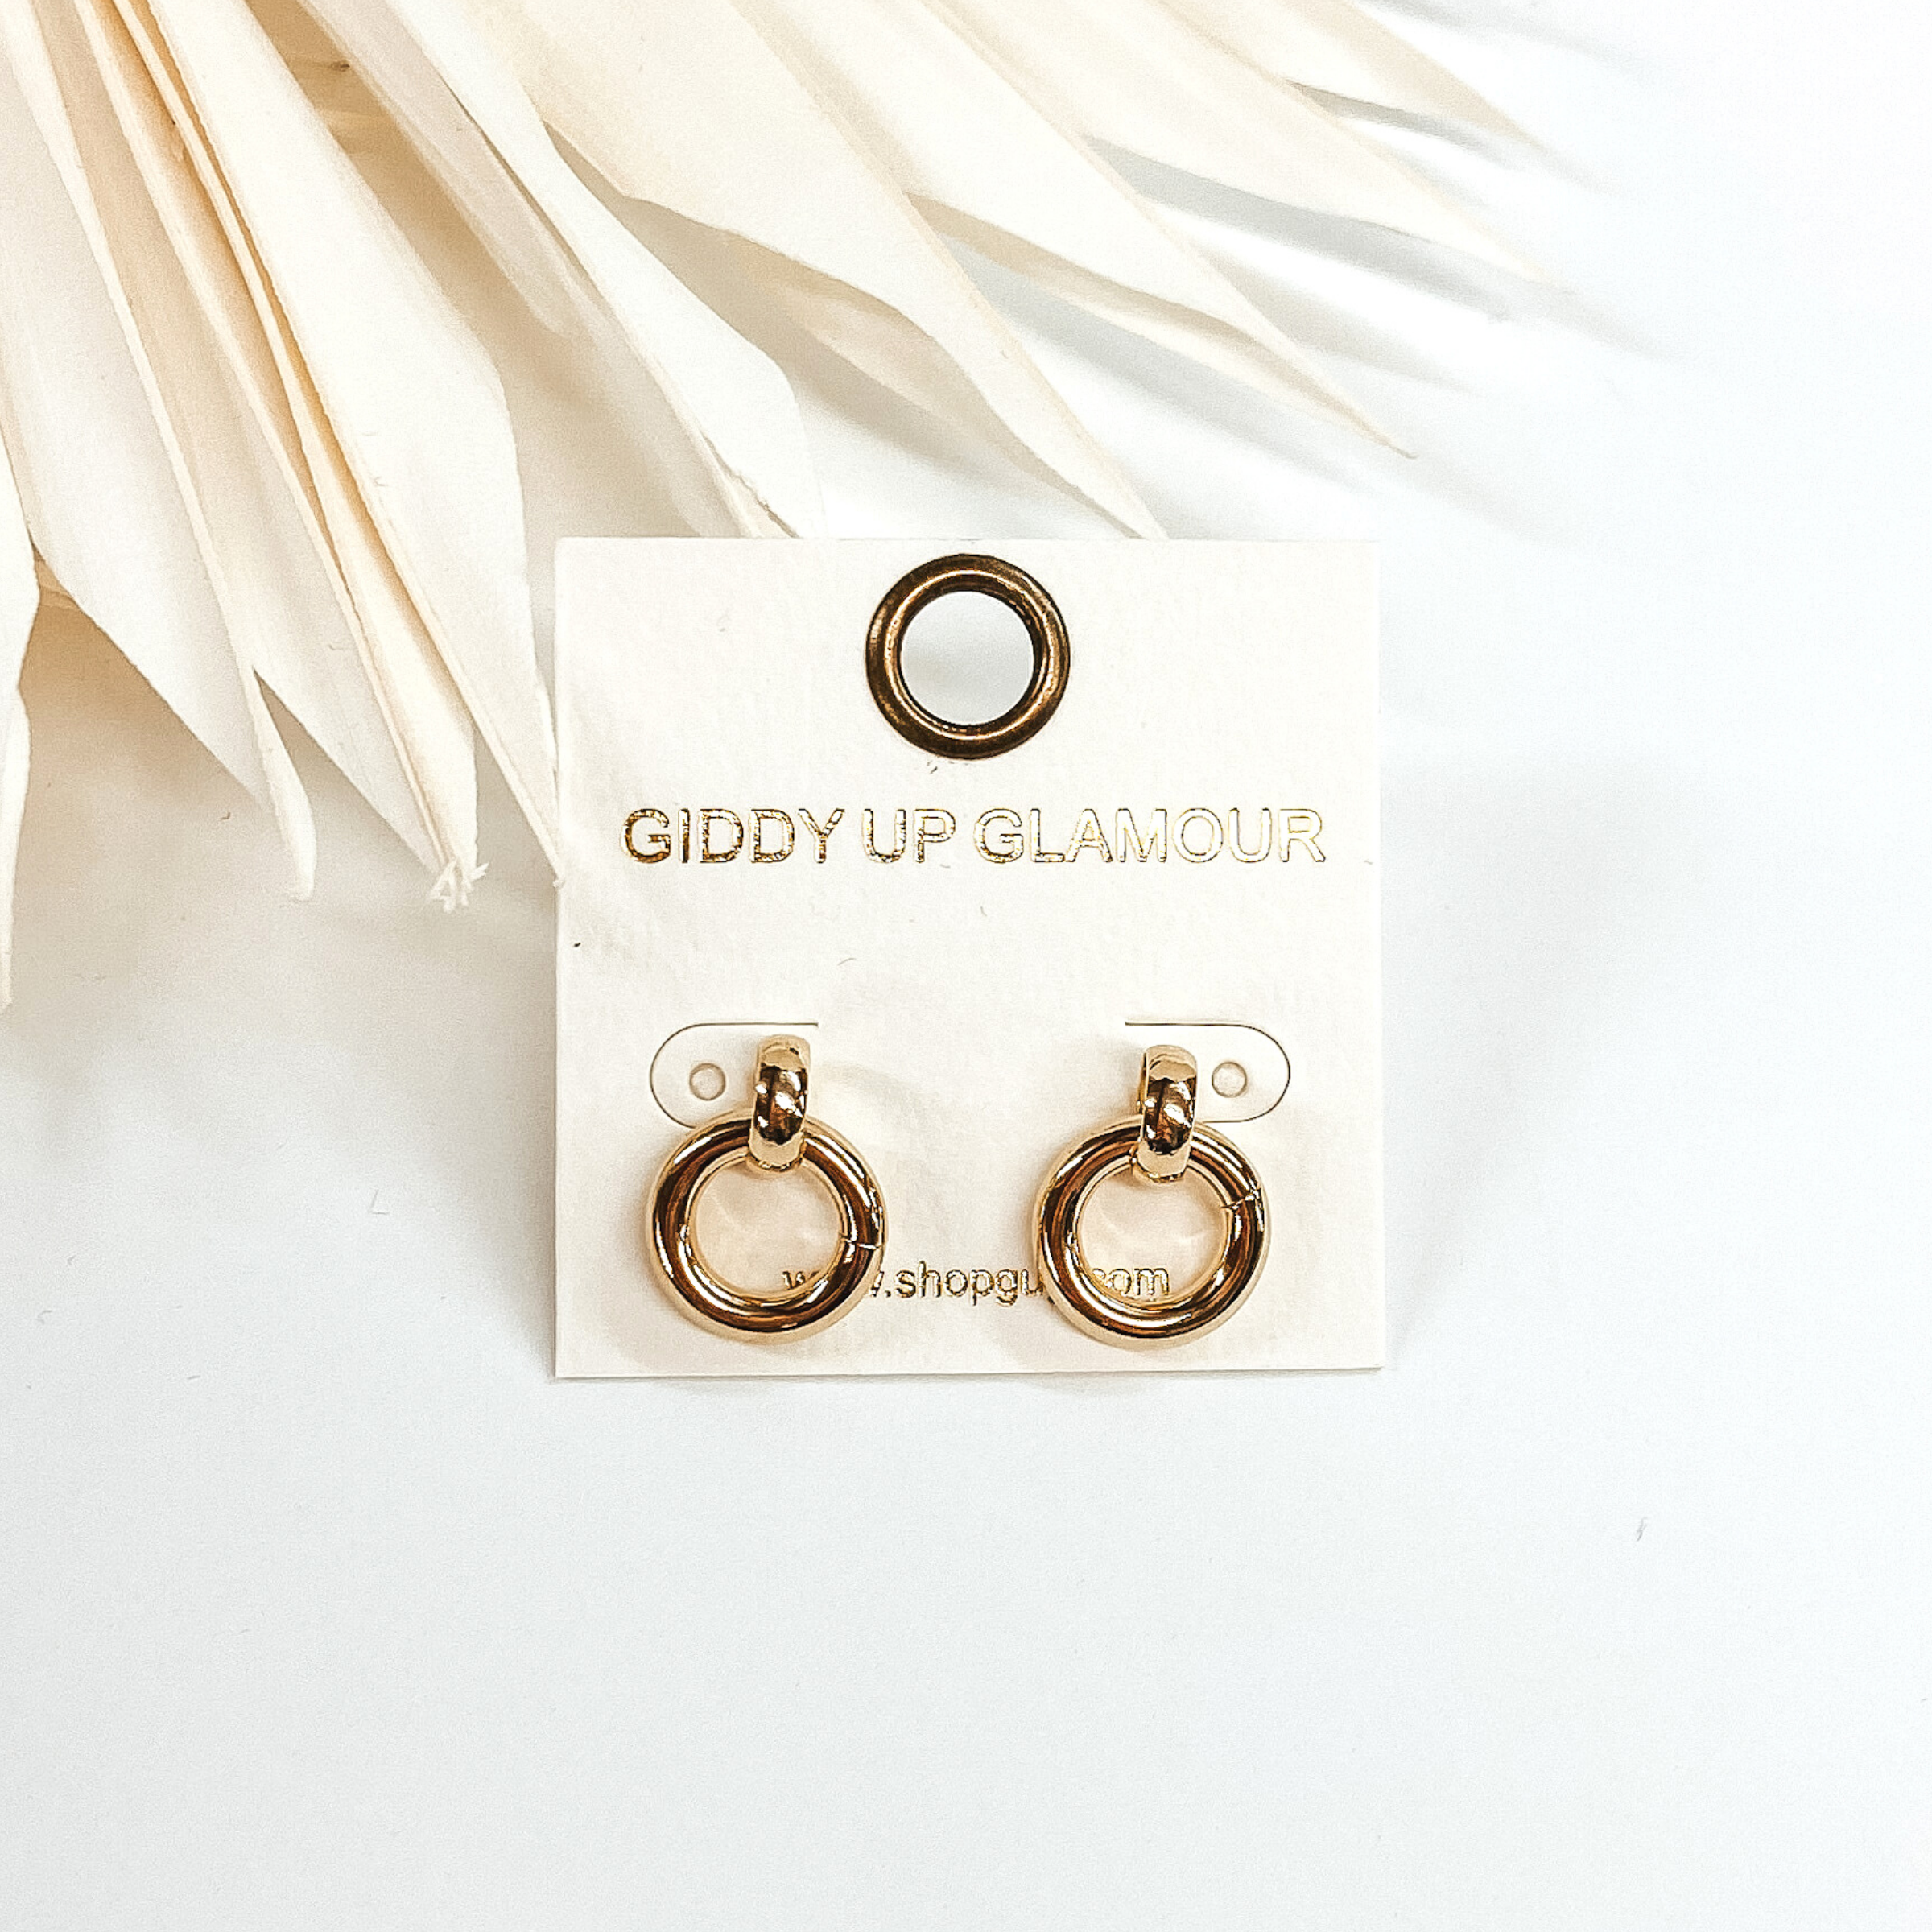 Tiny circle drop earrings in gold. These earrings are pictured in front of white leaves and on a white background.